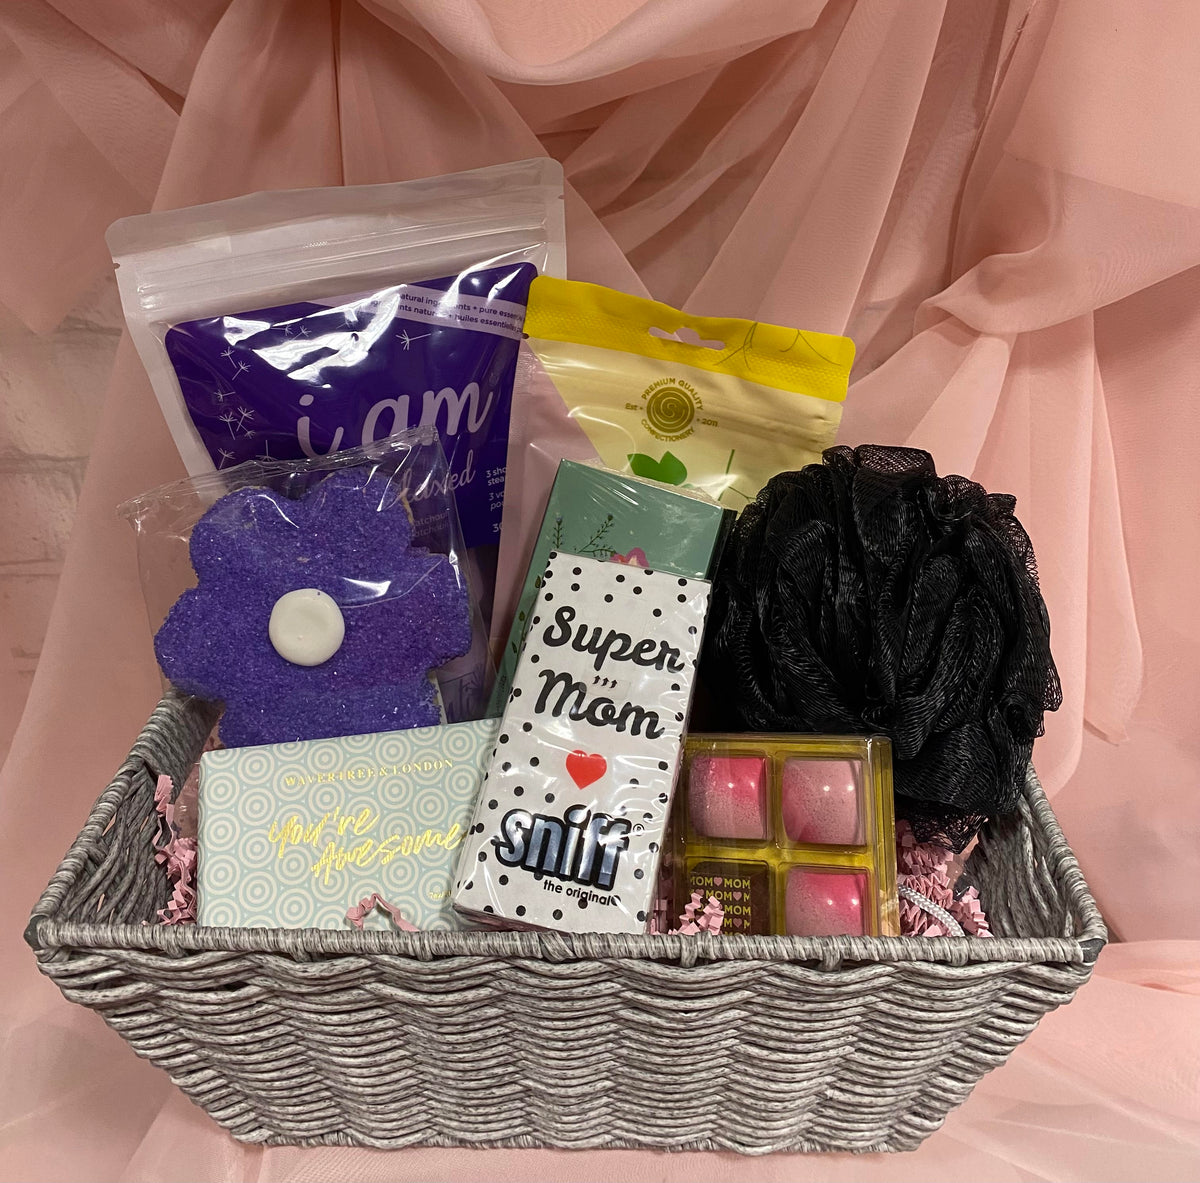 Supermom gift basket for a new mom 